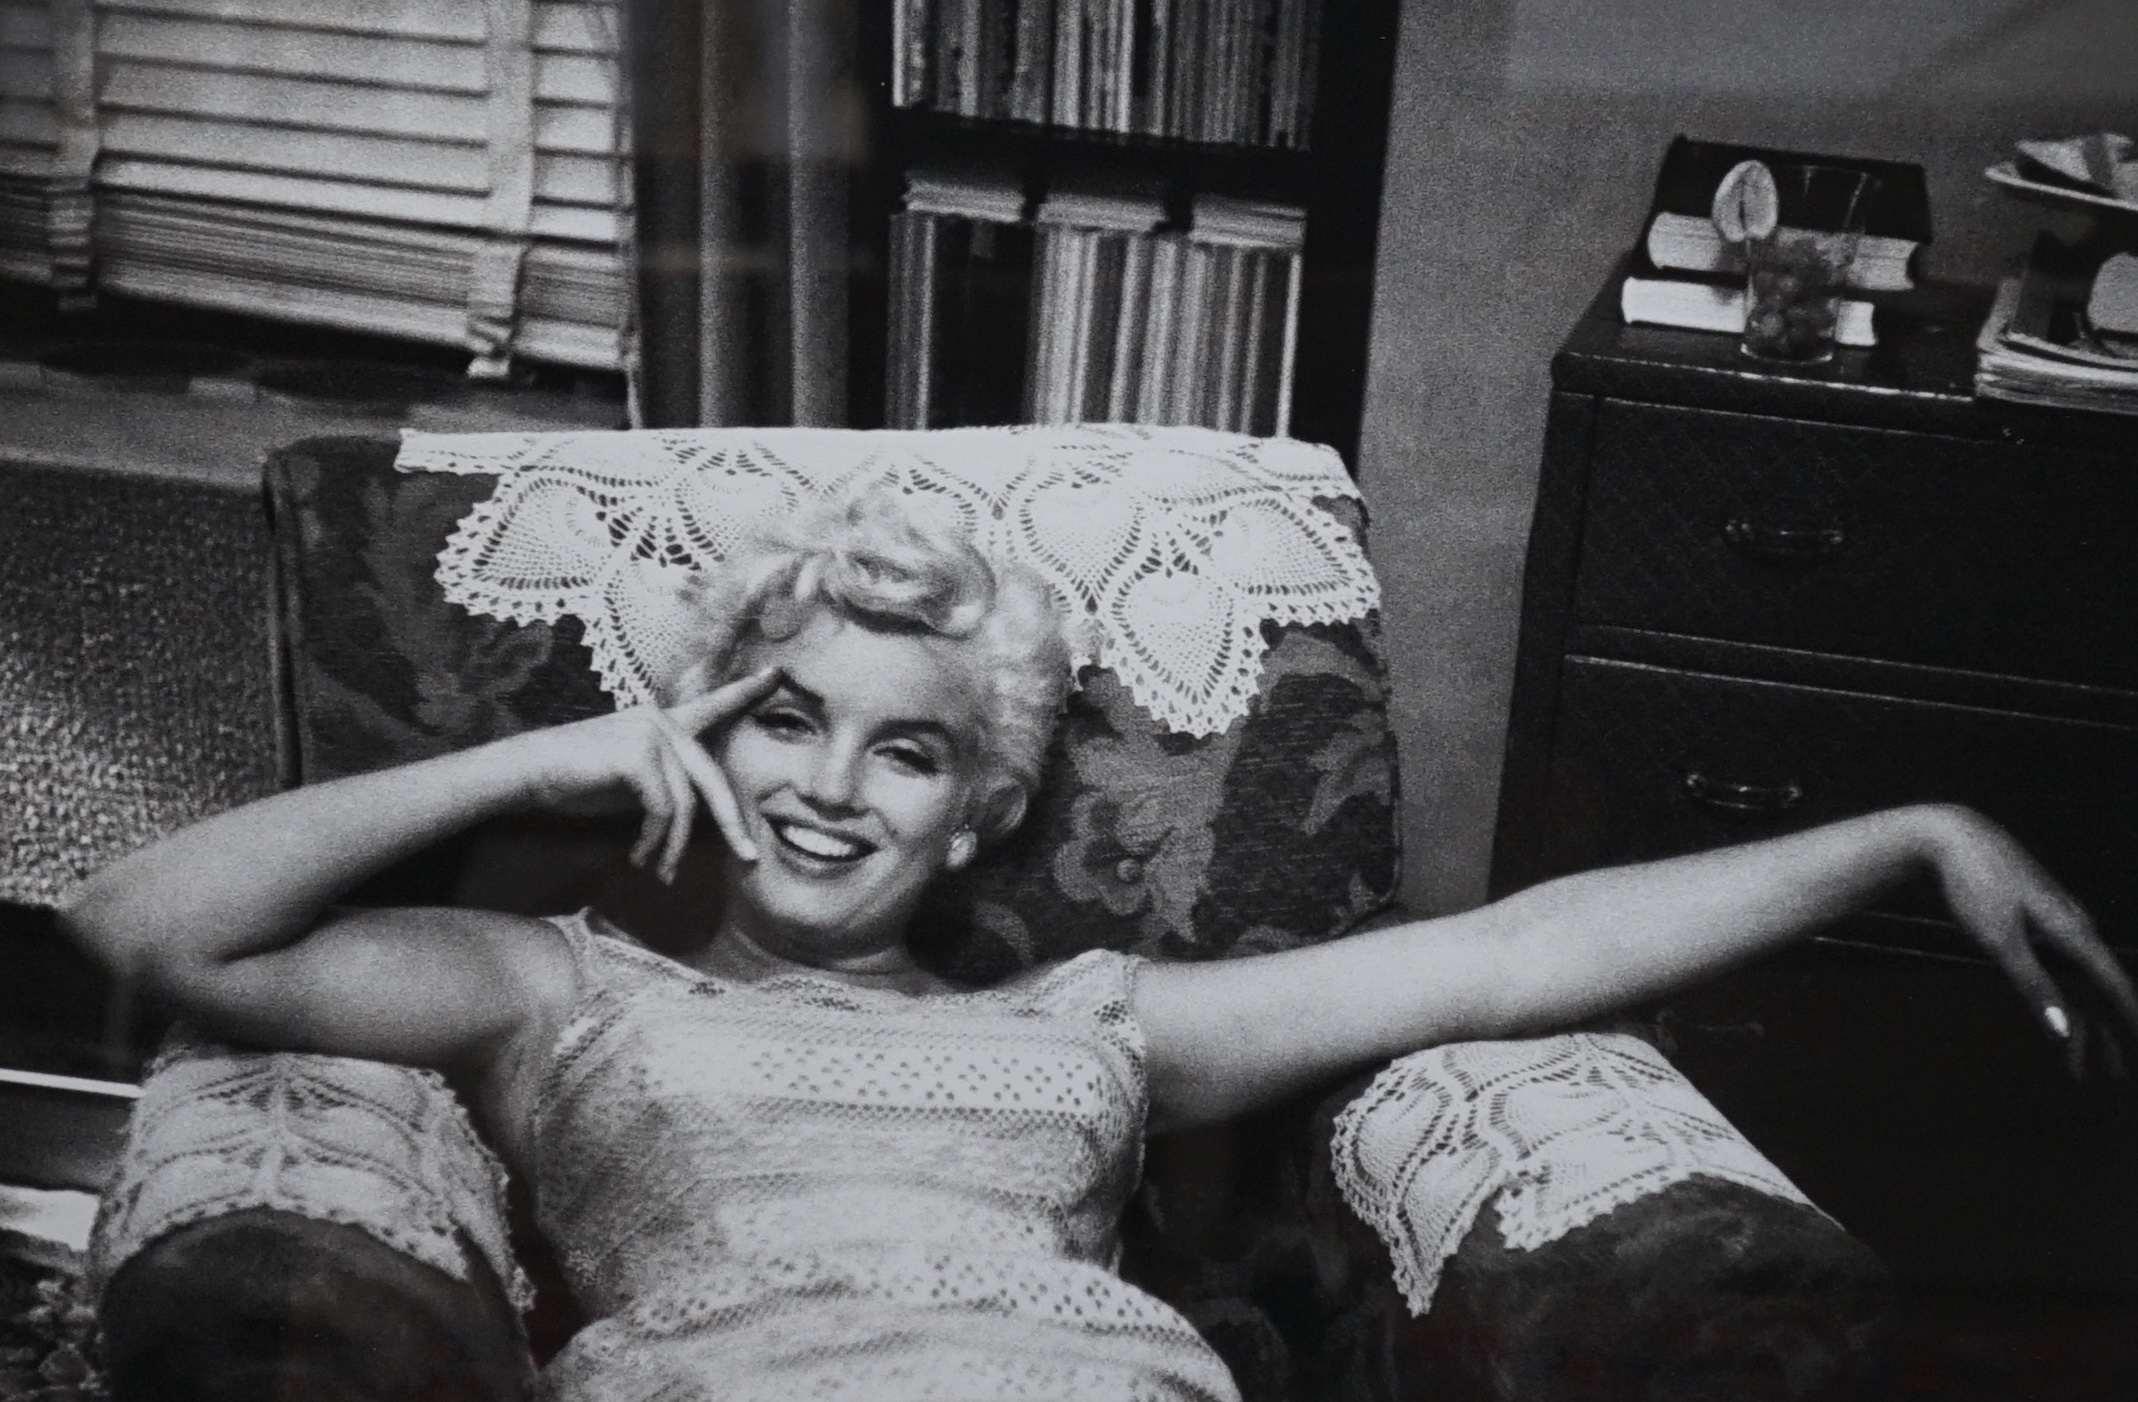 After Eve Arnold (1912-2012), limited edition re-printed photograph, Marilyn Monroe, pencil numbered 37/495, 49cm x 35cm. Condition - good